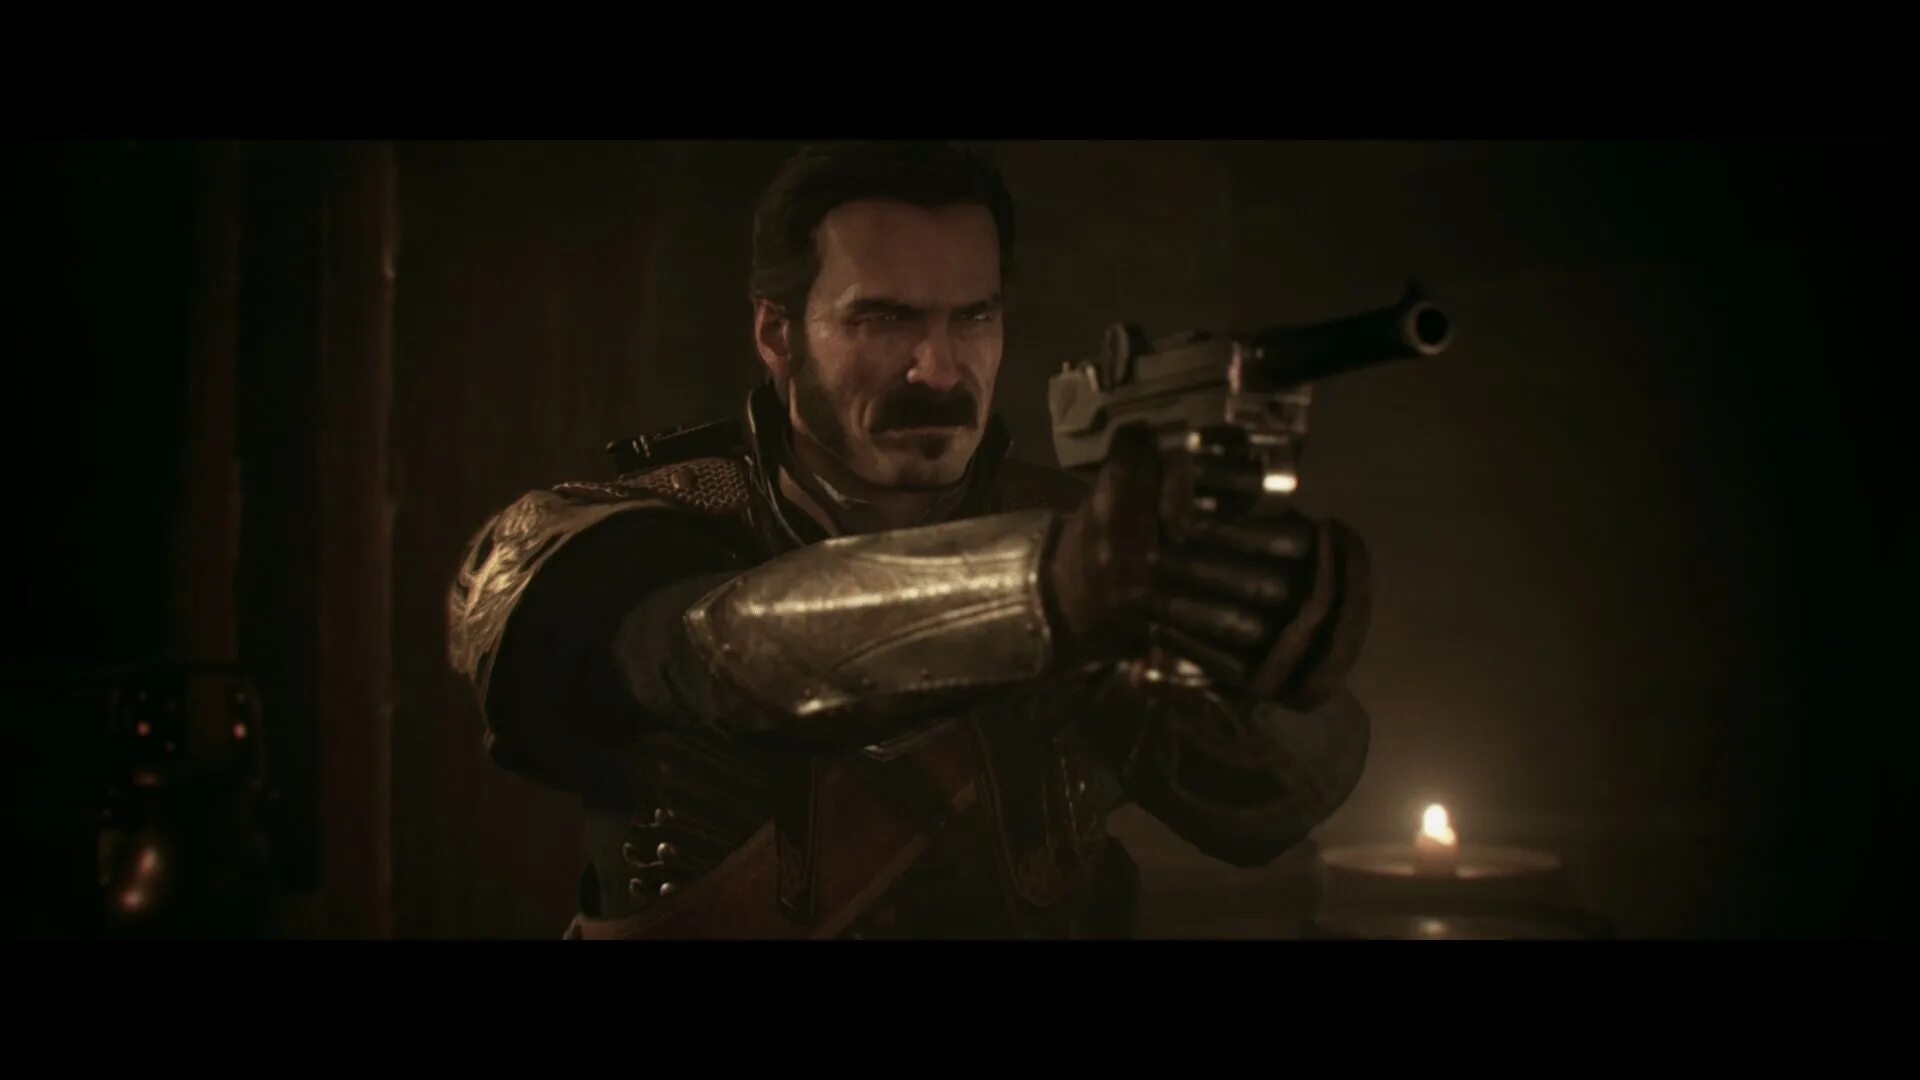 The order: 1886. The order 1886 геймплей. The order 1886 Скриншоты. Орден 1886 ps4 Gameplay.